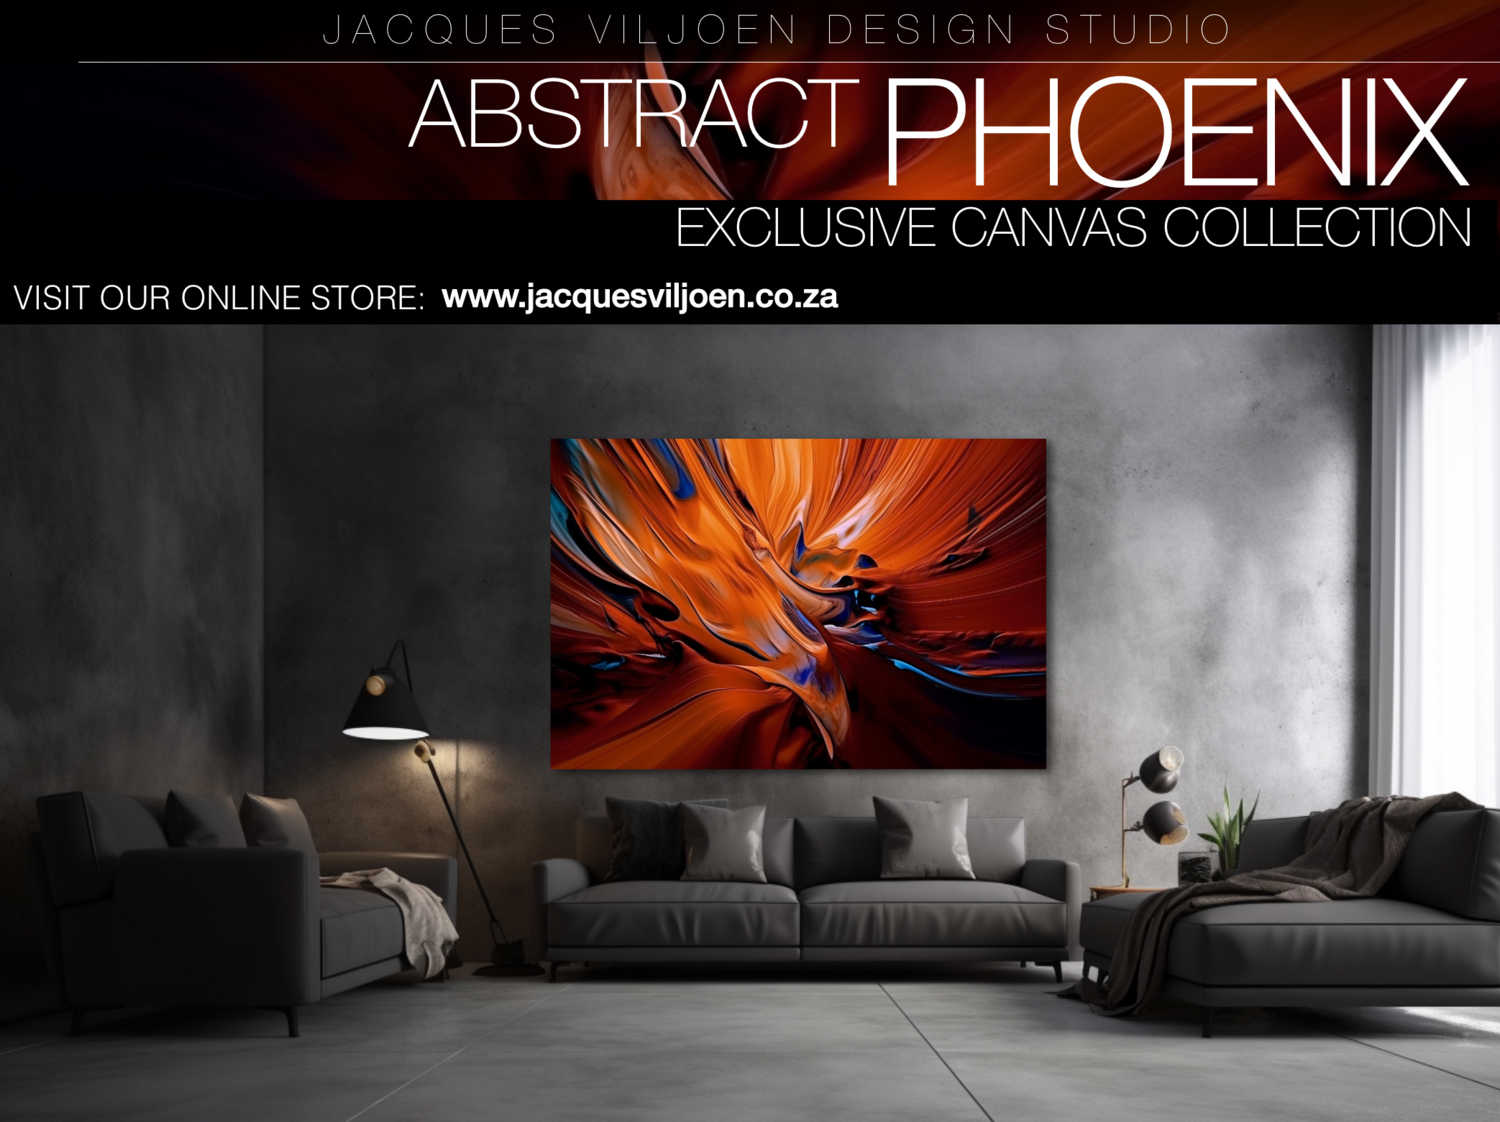 The Abstract Phoenix